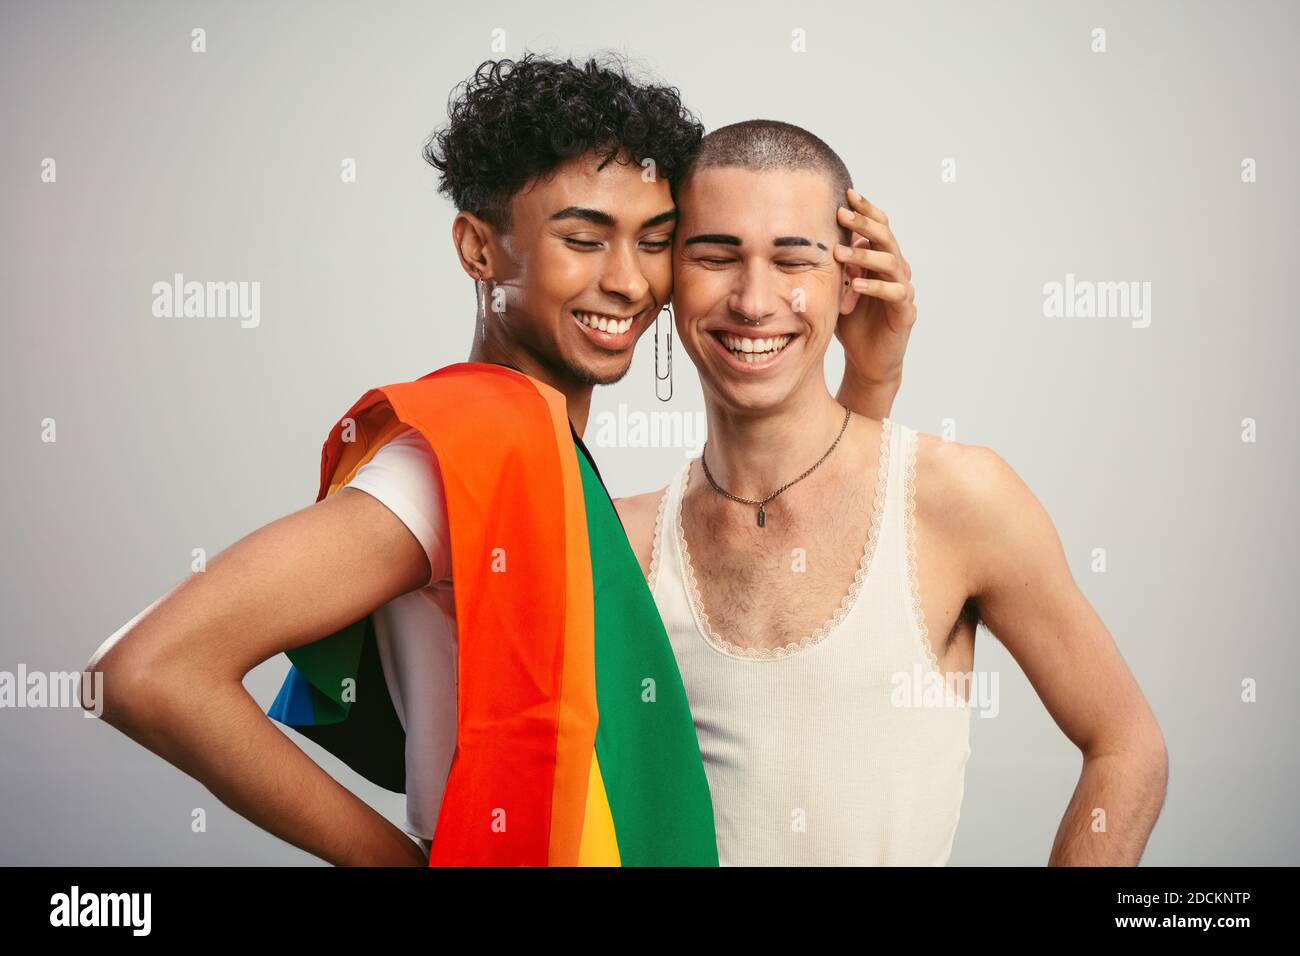 Cheerful gay couple with pride flag on white background. Two homosexual men standing together and smiling. Stock Photo